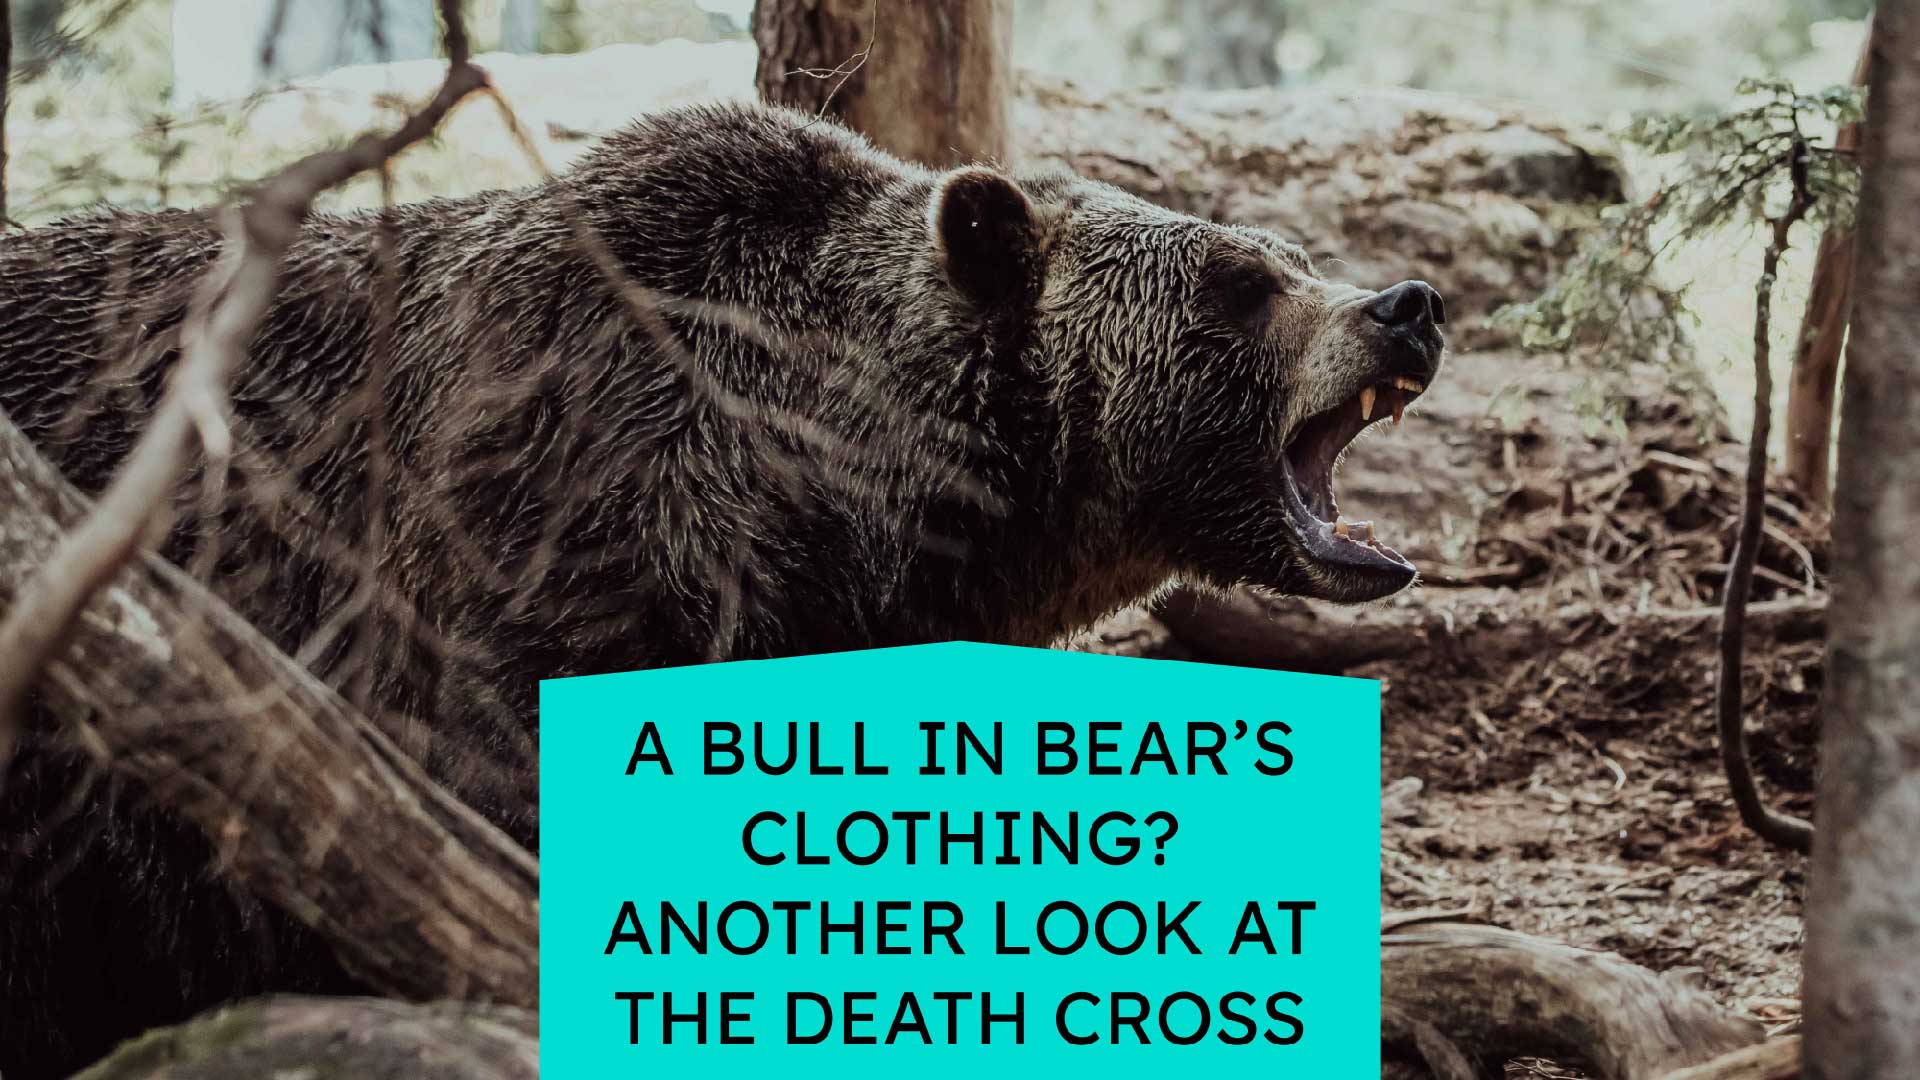 A Bull in Bear’s Clothing? Another Look at the Death Cross